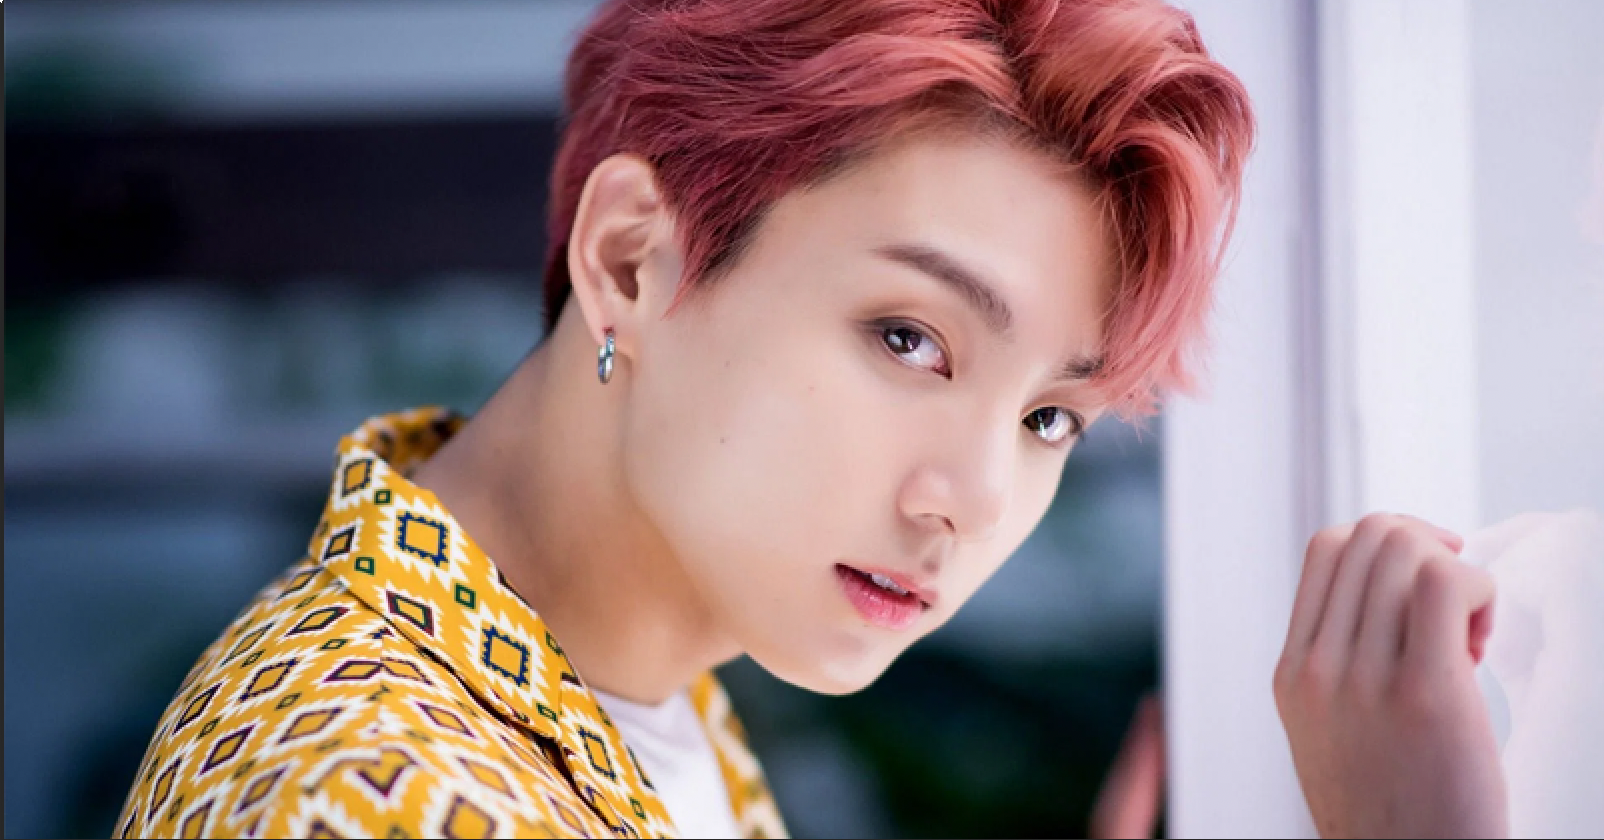 BTS Jungkook's 'Euphoria' Receives Gold Certification by the RIAJ, First BTS Solo to Do So